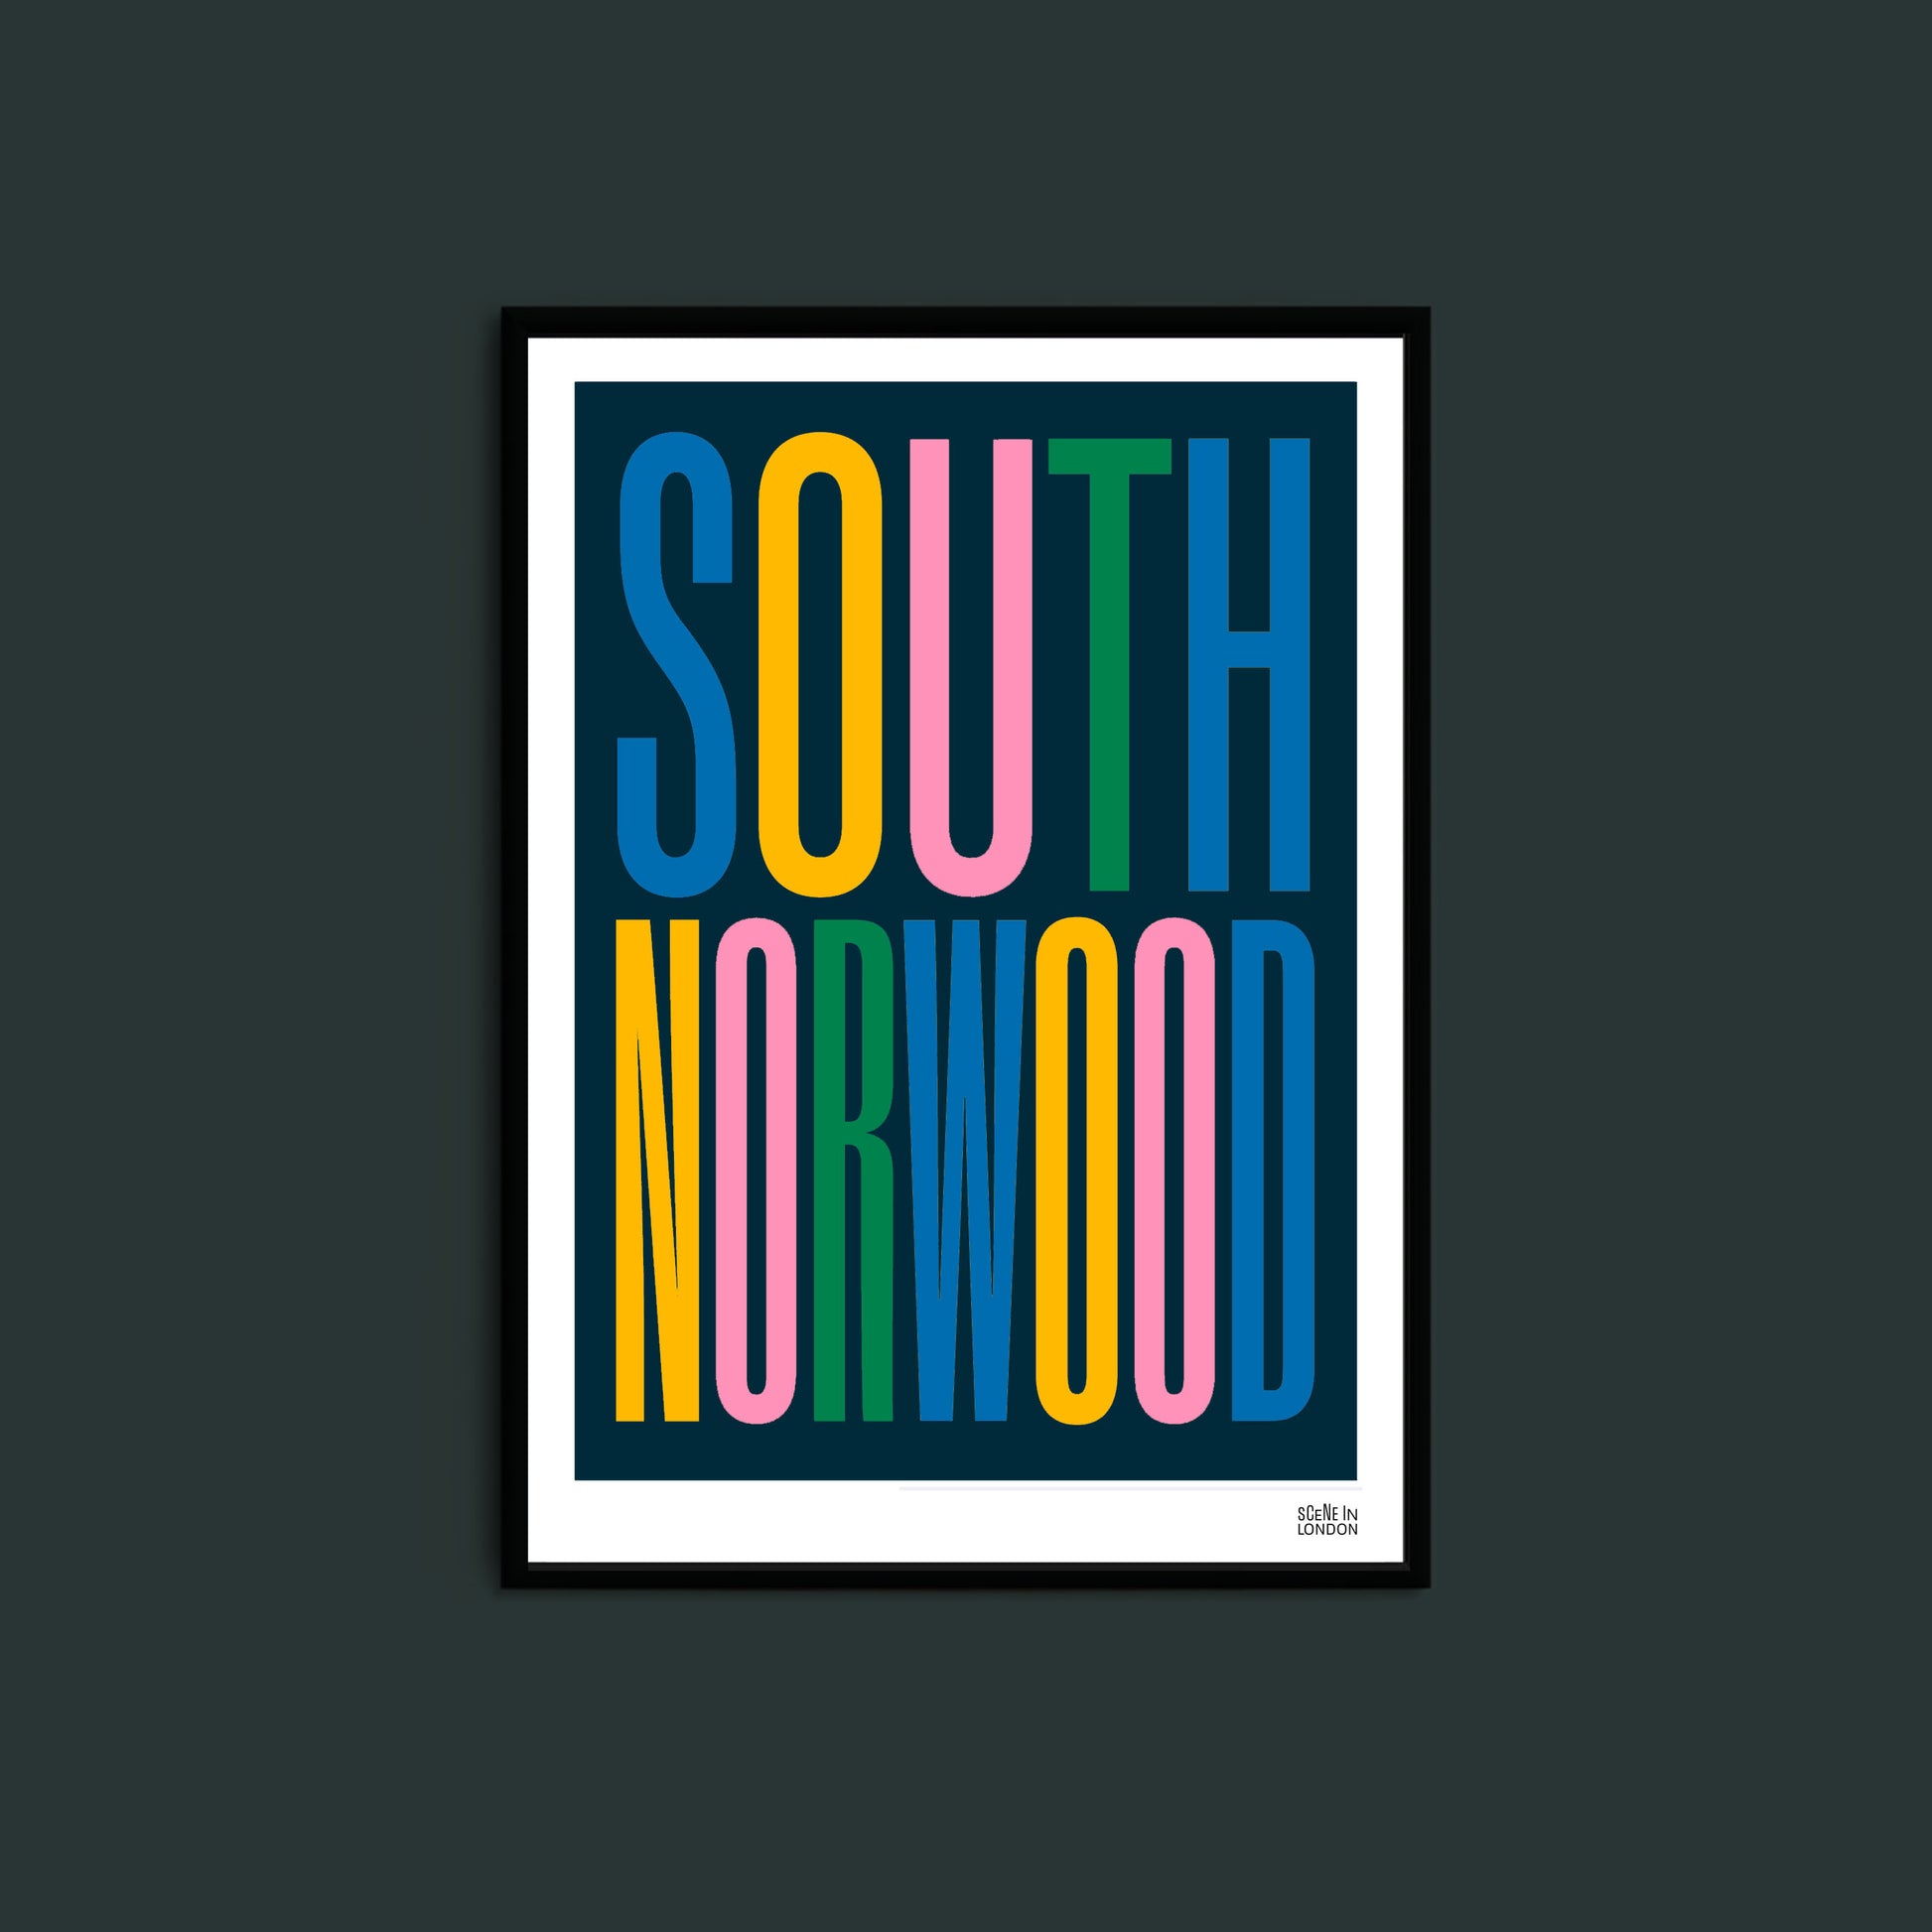 South Norwood typography print